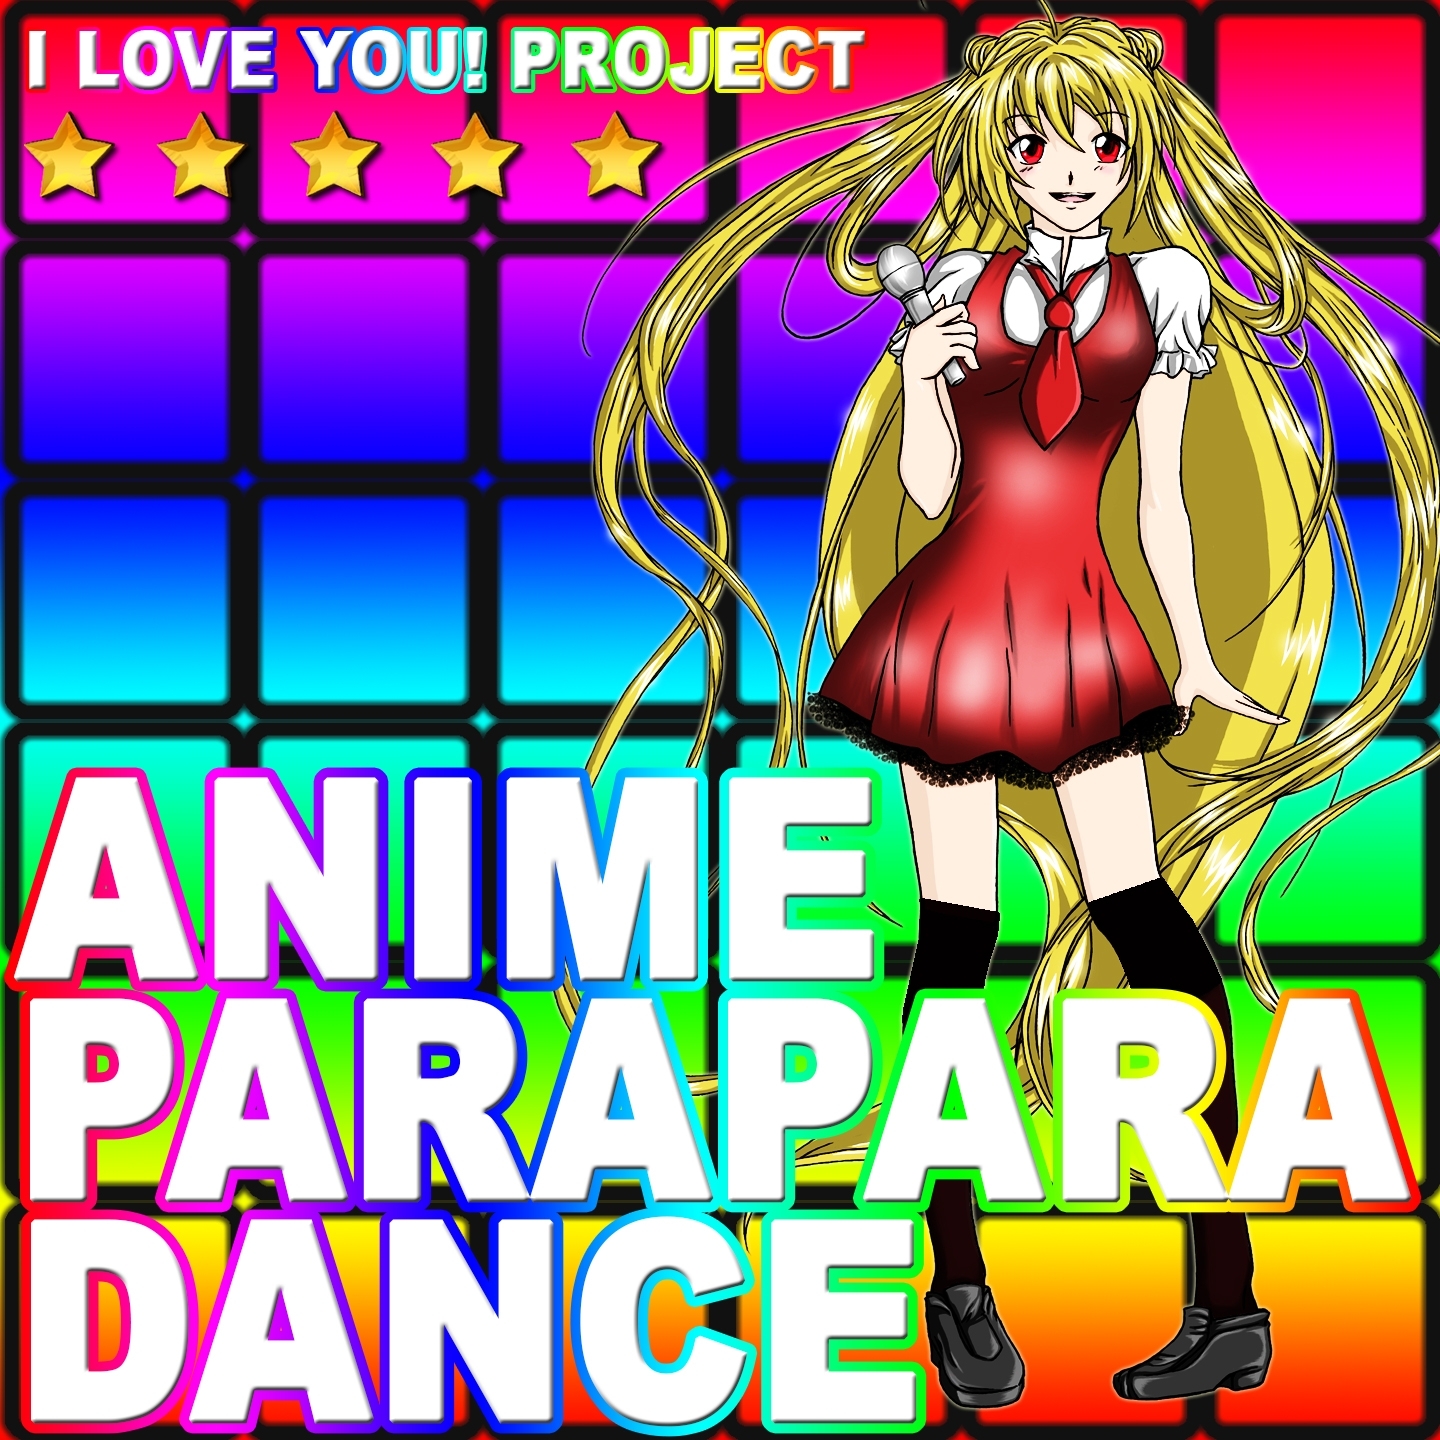 Butterfly (From Dance Dance Revolution) (Parapara Dance Version)